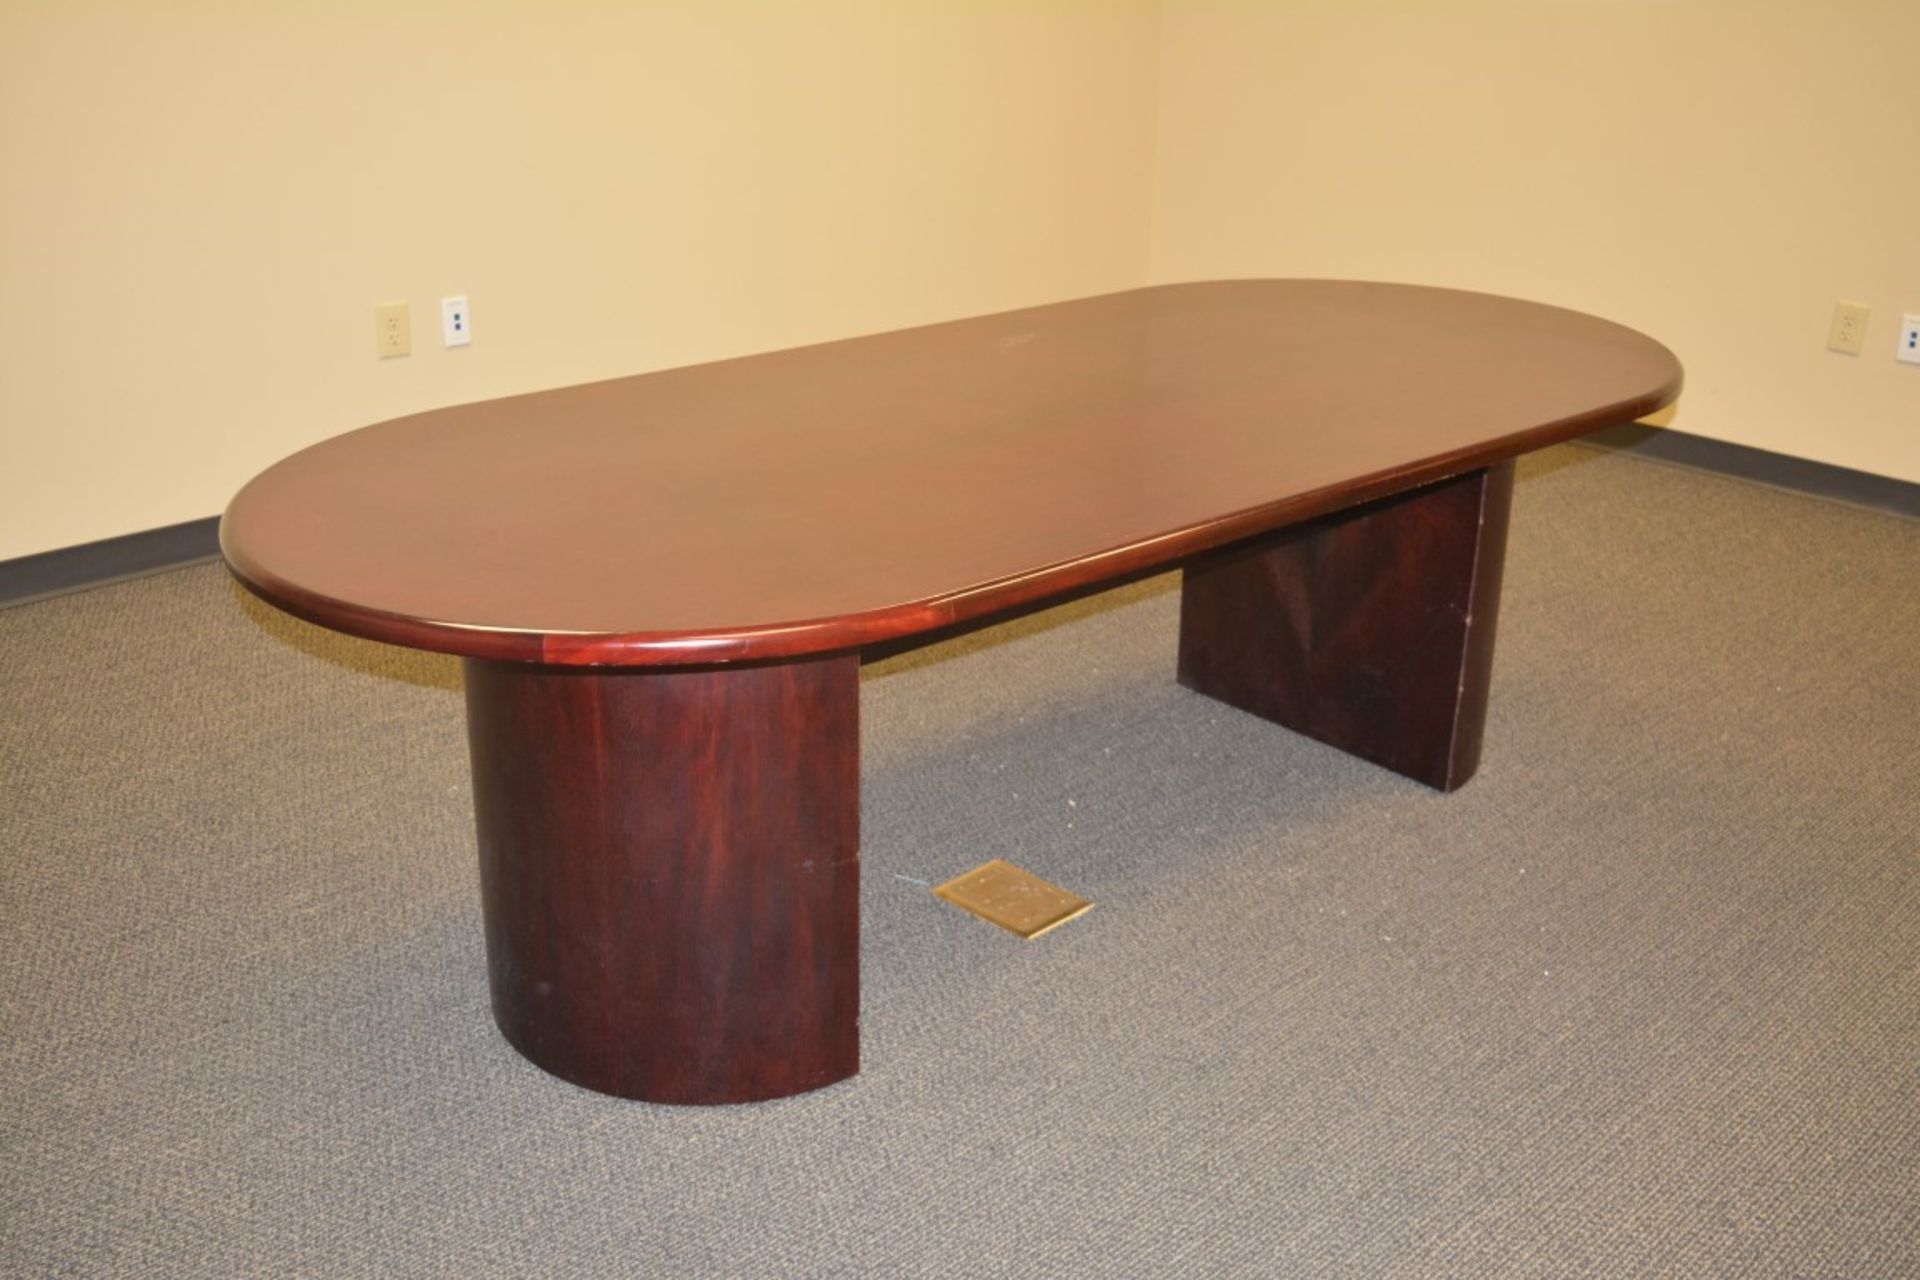 USED CONFERENCE TABLE